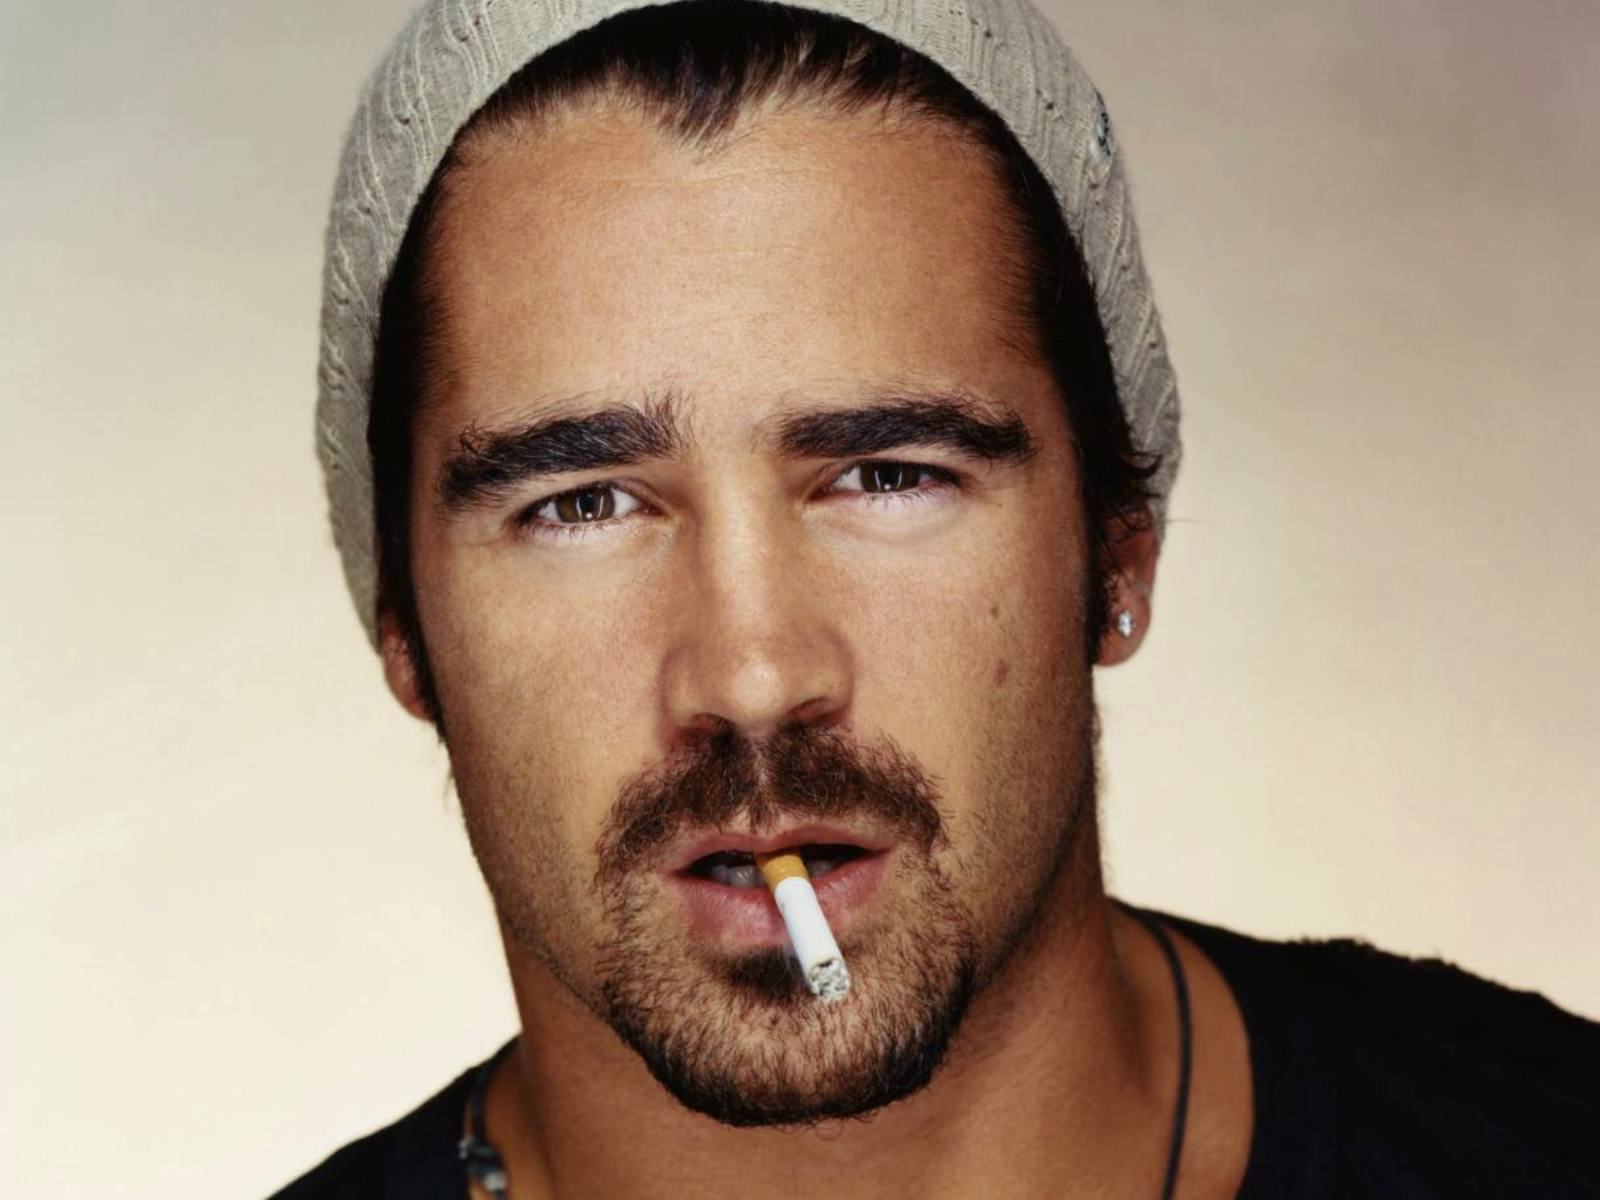 Wallpaper Of The Day Colin Farrell